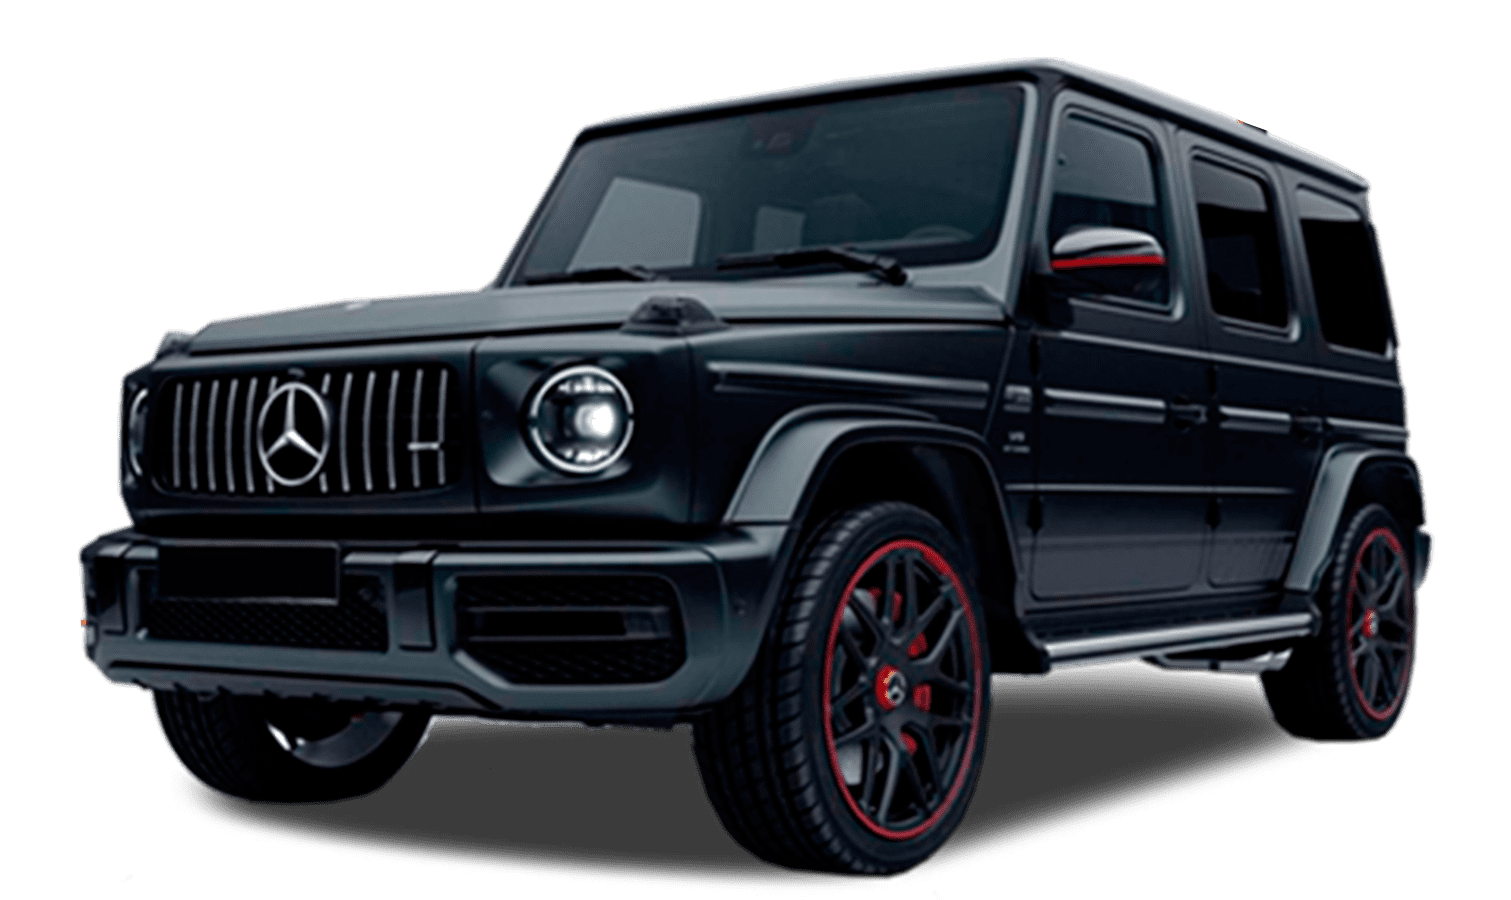 Mercedes AMG G63, Jancars, High-end, sports and luxury car rental